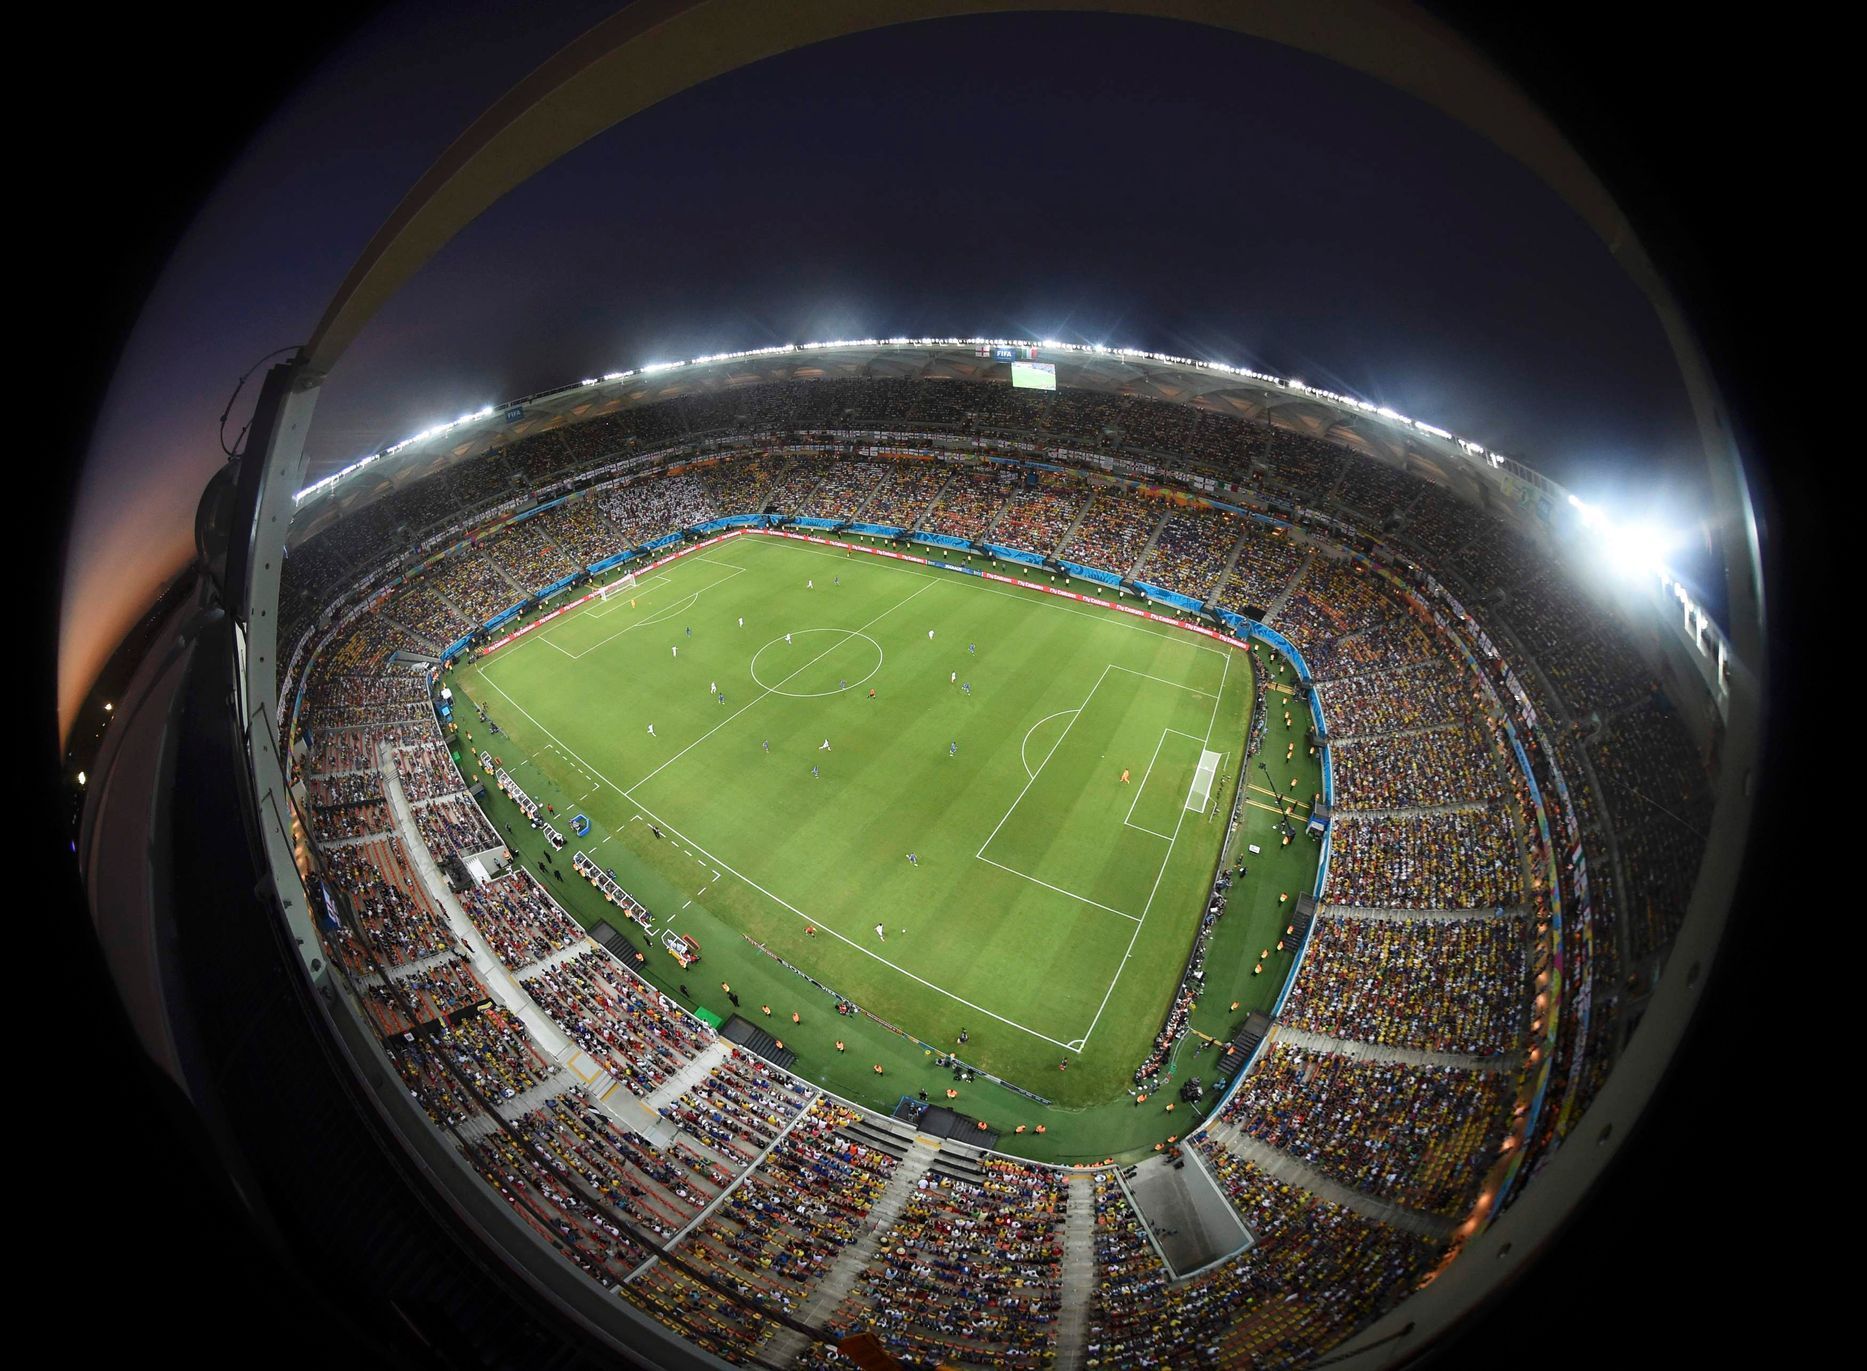 A general view of the 2014 World Cup Group D soccer match between Italy and England at the Amazonia arena in Manaus